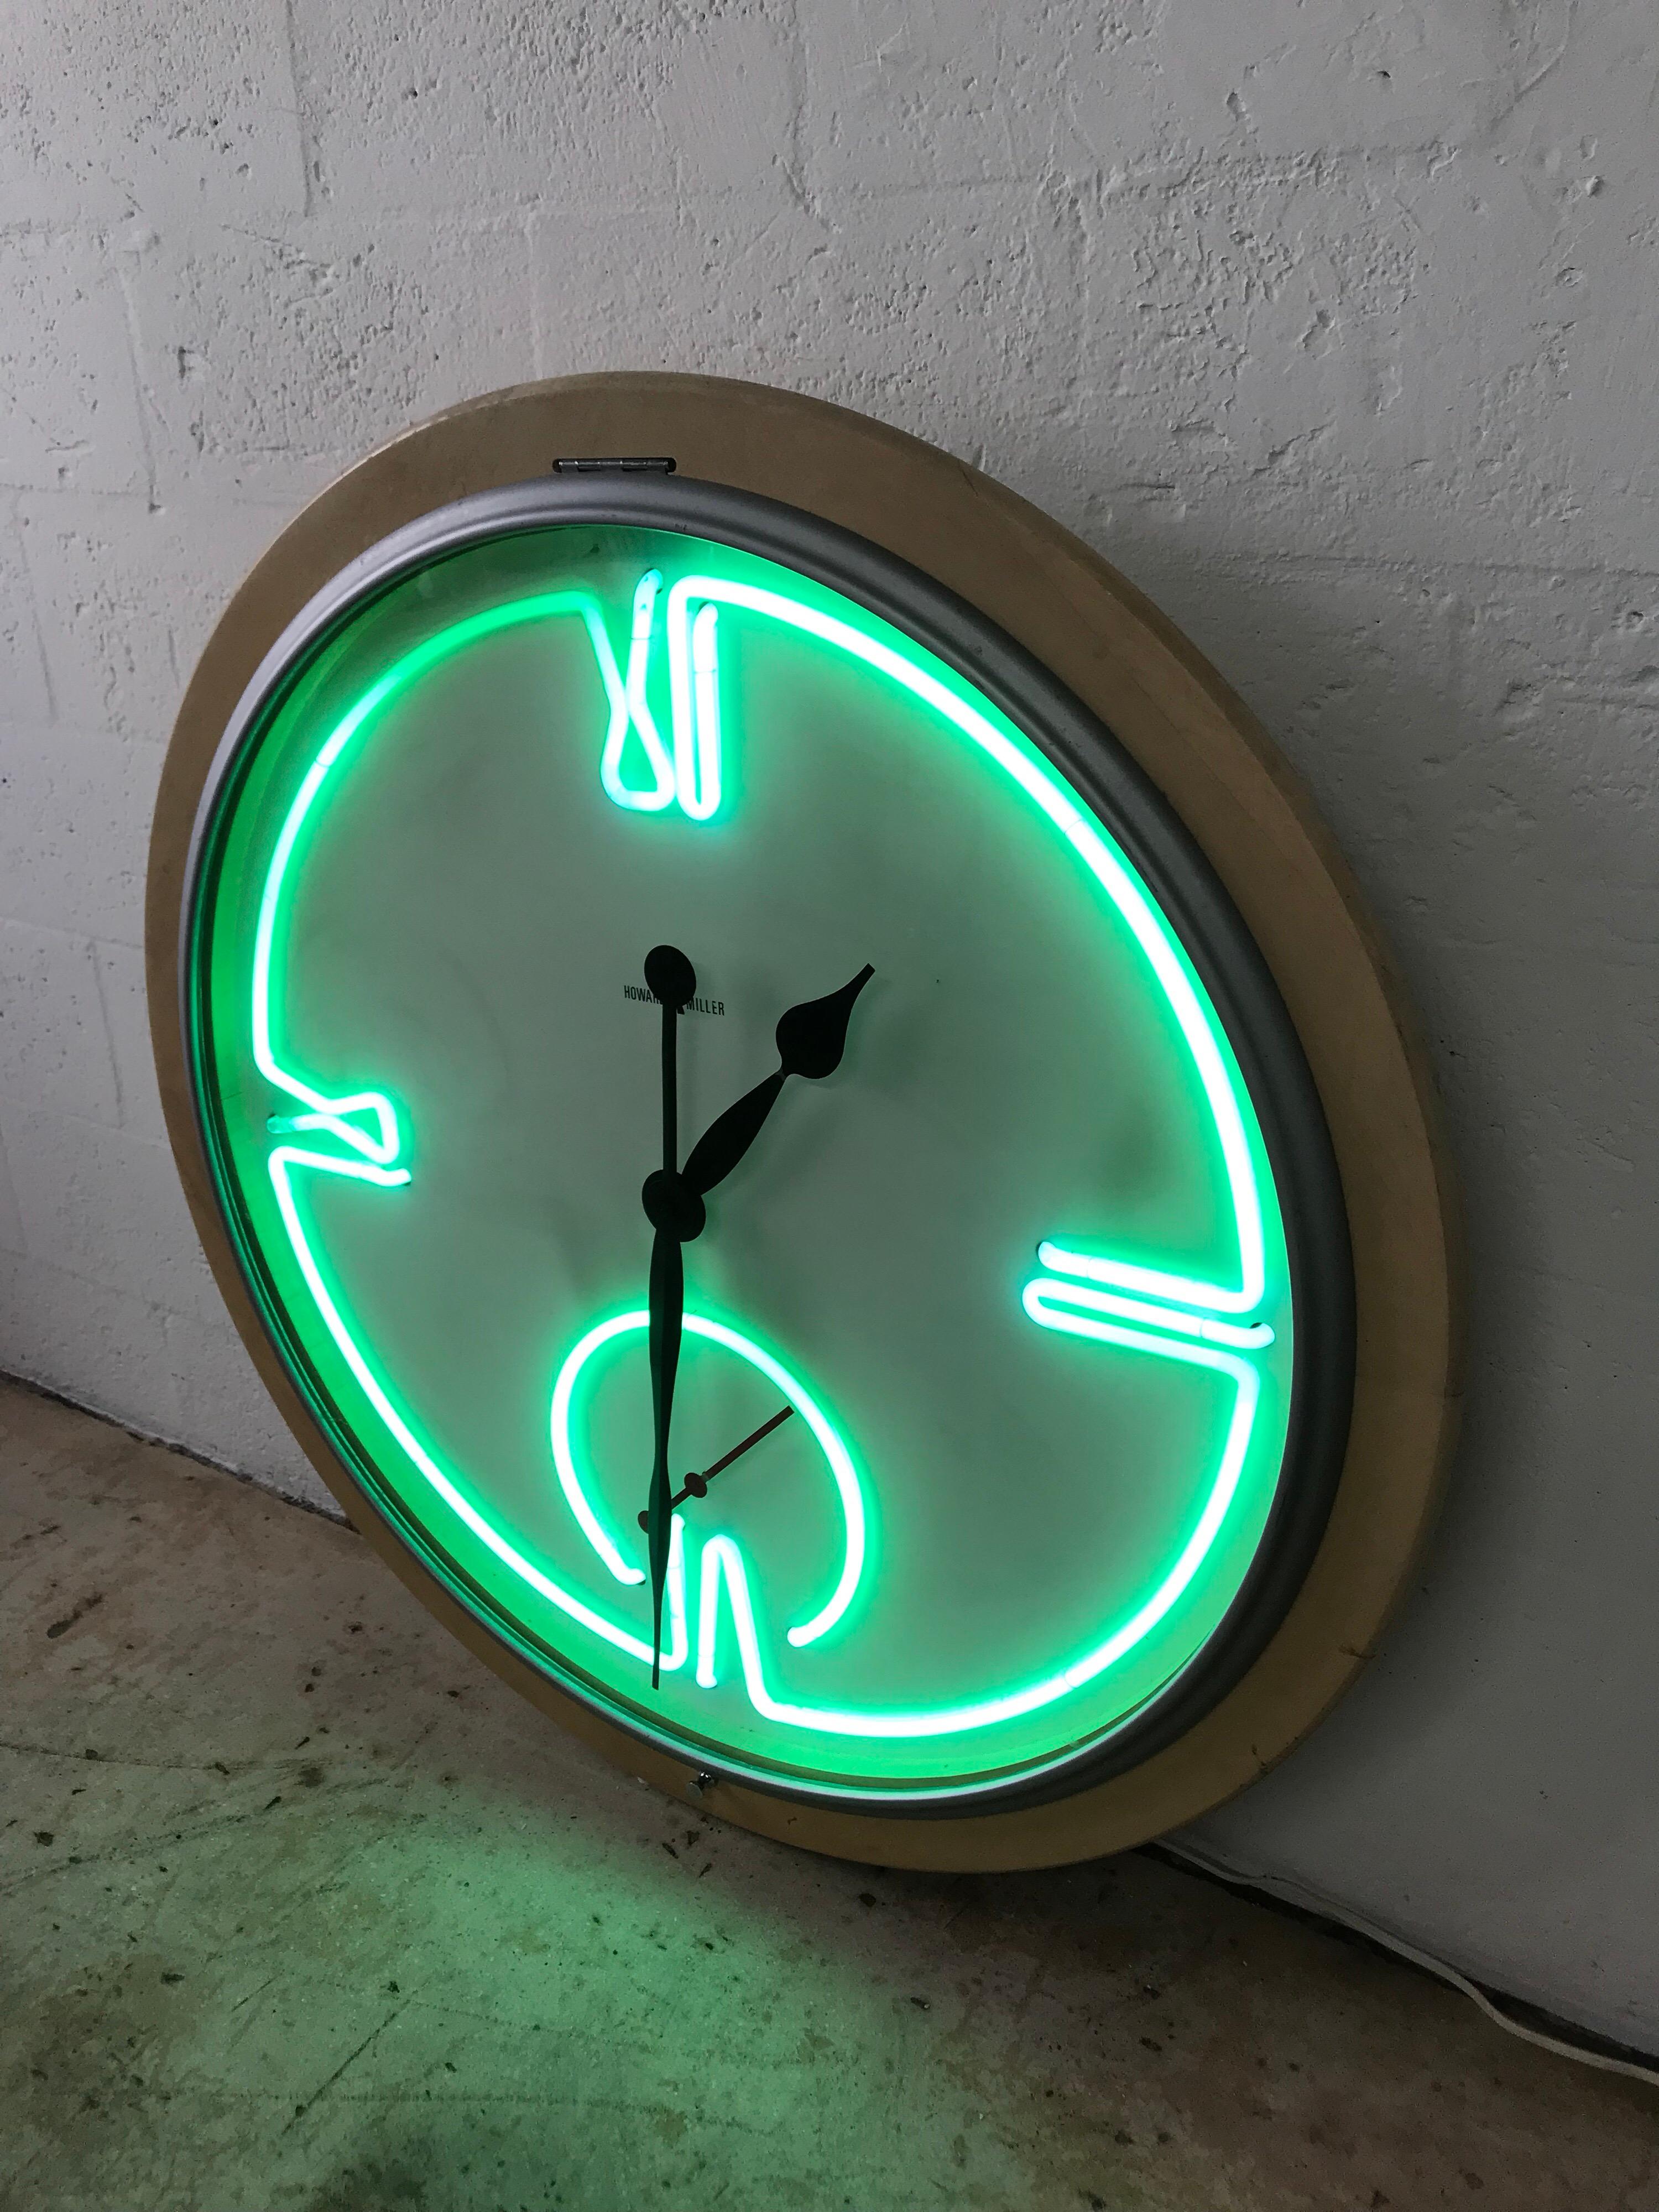 Large-scale neon wall clock by Howard Miller, in the 1980s Art Deco Renaissance style.